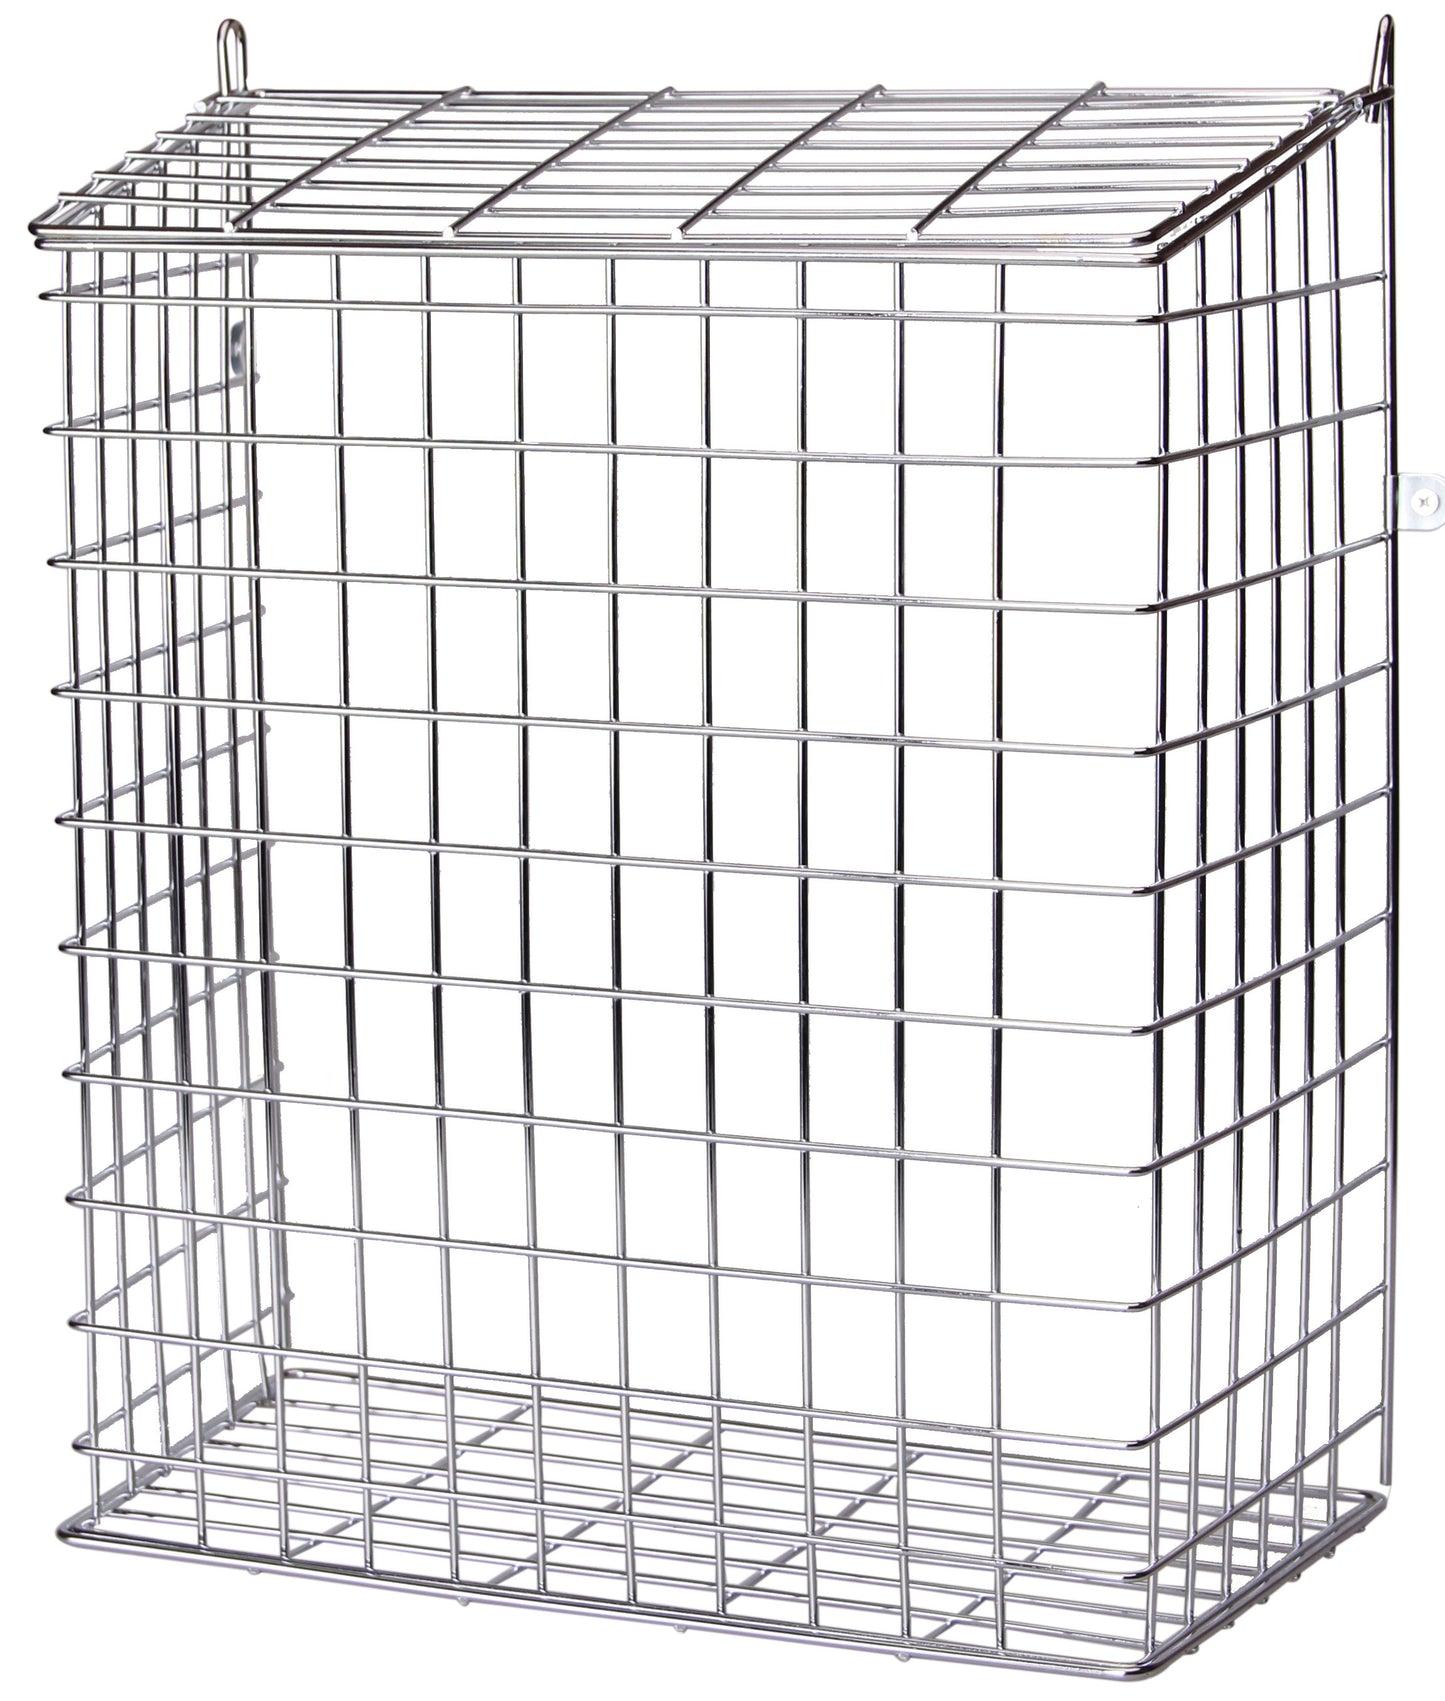 Buckingham Front Door Letter Cage, Guard, Basket, Mail Catcher, Post Box, Letter Box, Pre-Assembled, Chrome Plated